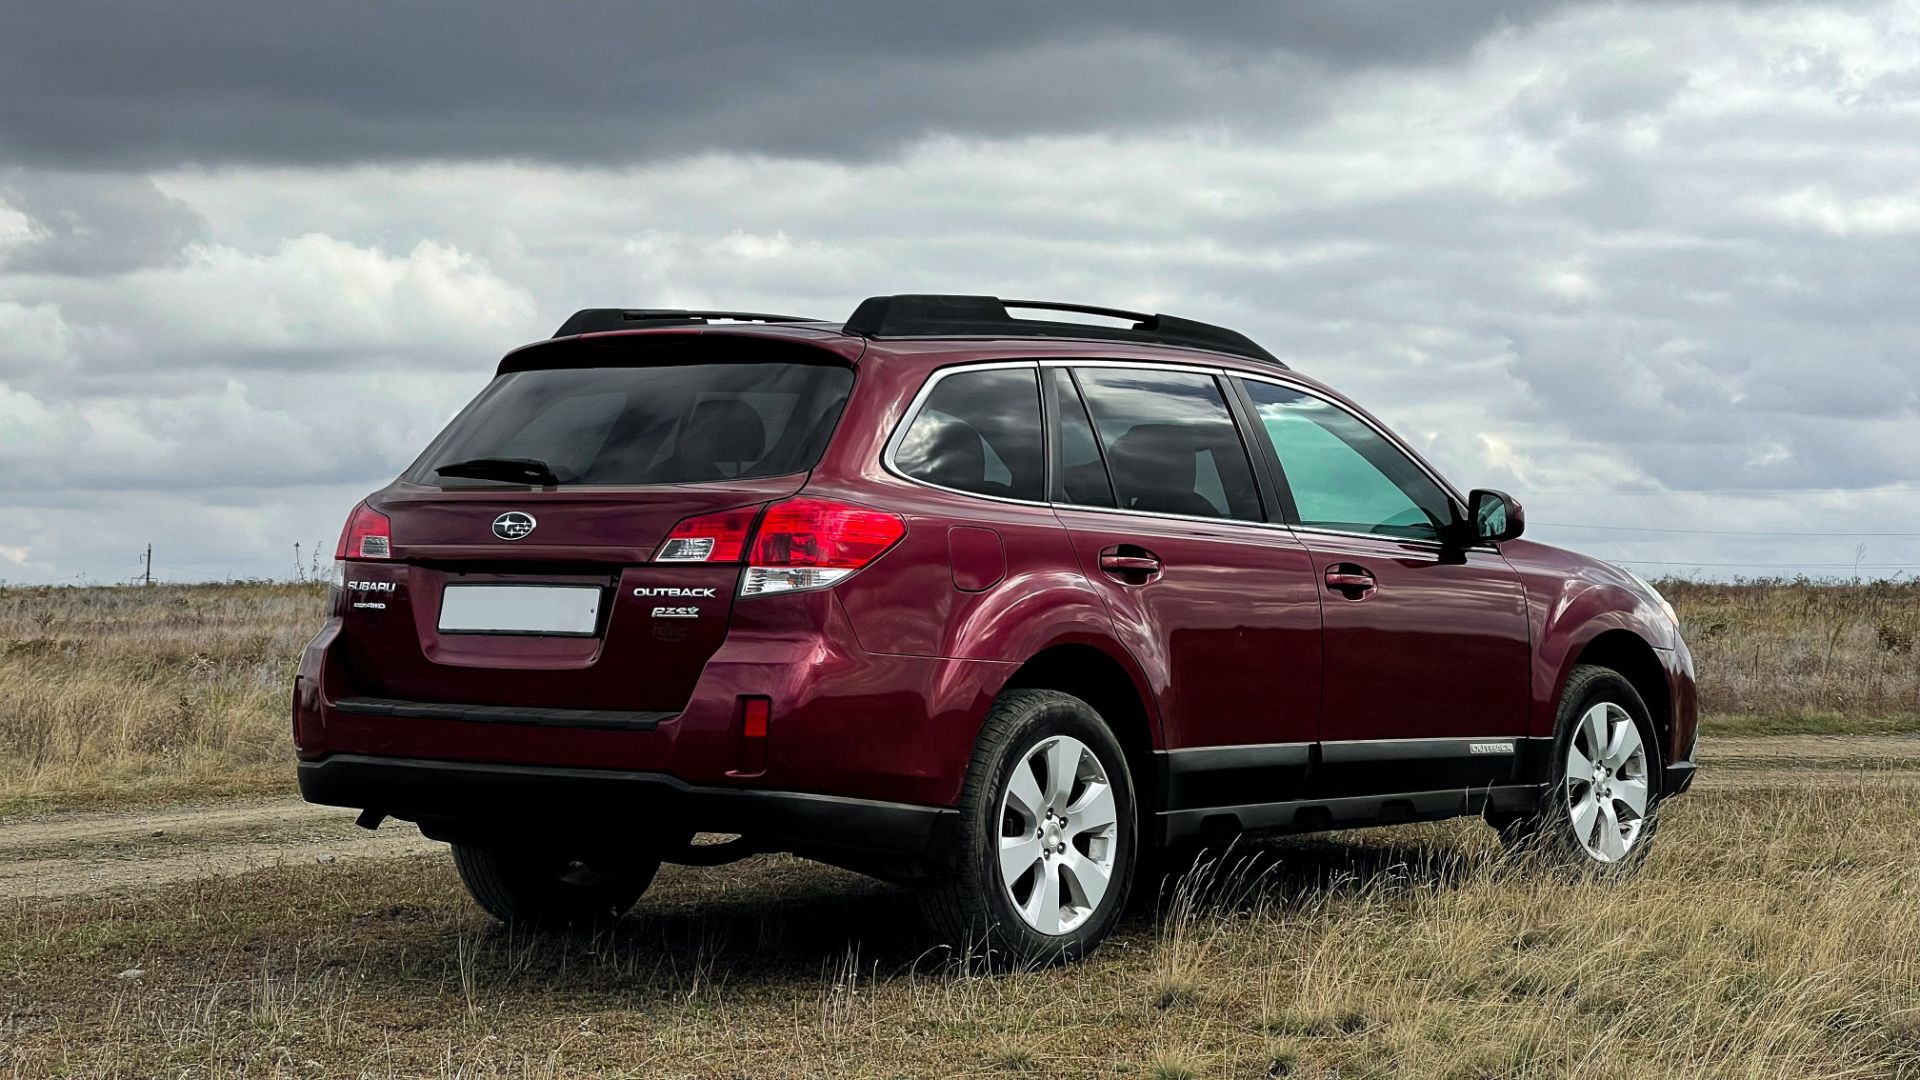 Subaru Outback Best and Worst Years